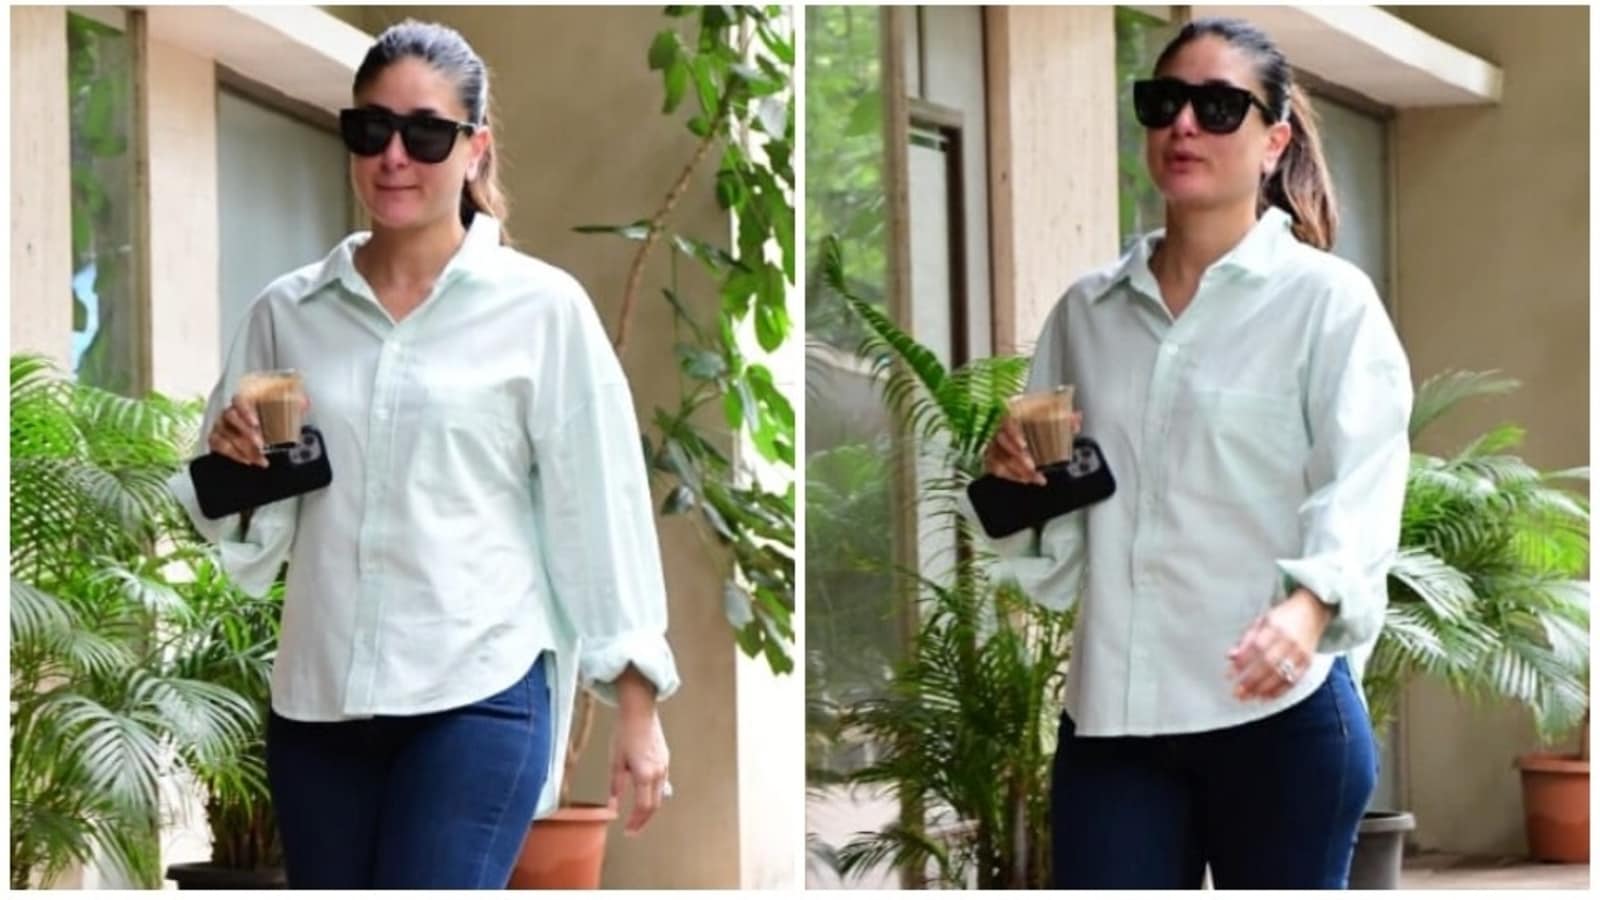 Kareena Kpoor Xxx Video - Kareena Kapoor steps out with cutting chai in hand as she nails everyday  dressing in shirt and jeans: See pics, video | Fashion Trends - Hindustan  Times